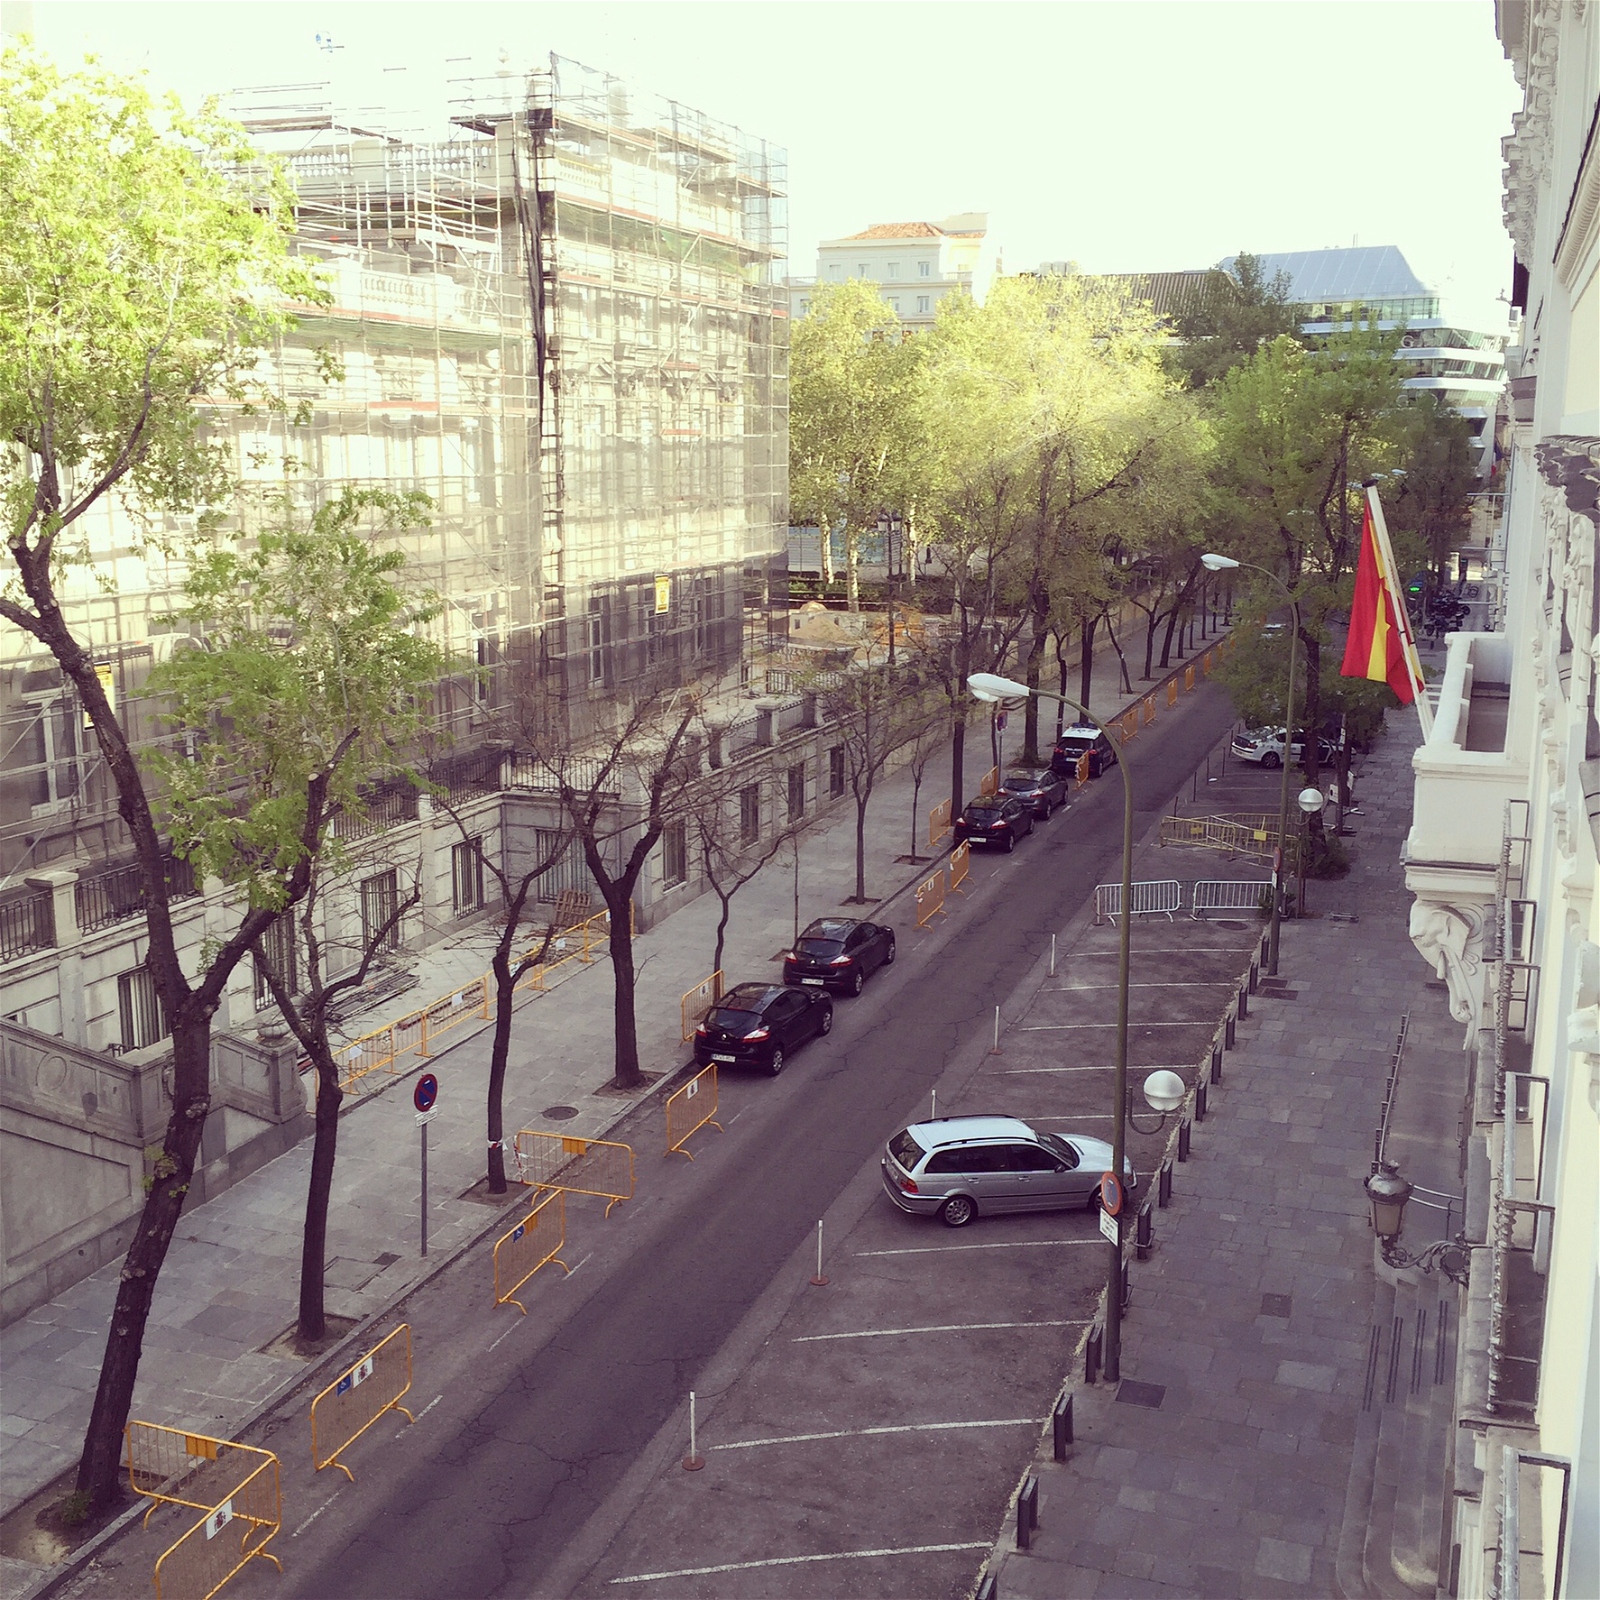 Madrid is a ghost town at 10:30am on a Sunday